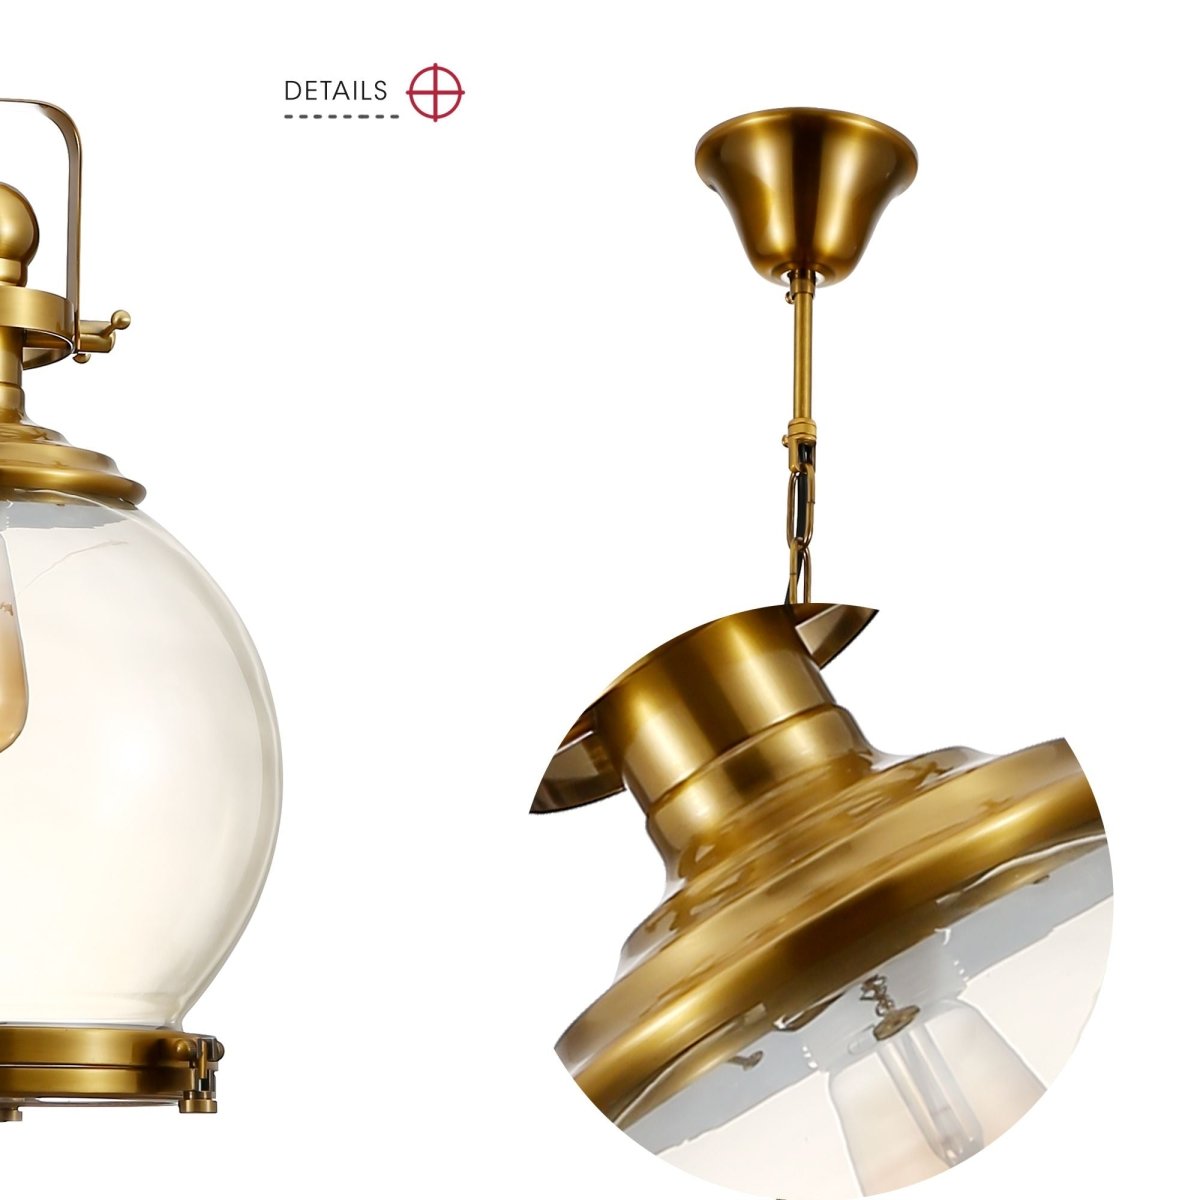 Detailed photo of golden bronze metal amber glass globe pendant light sealed with e27 fitting